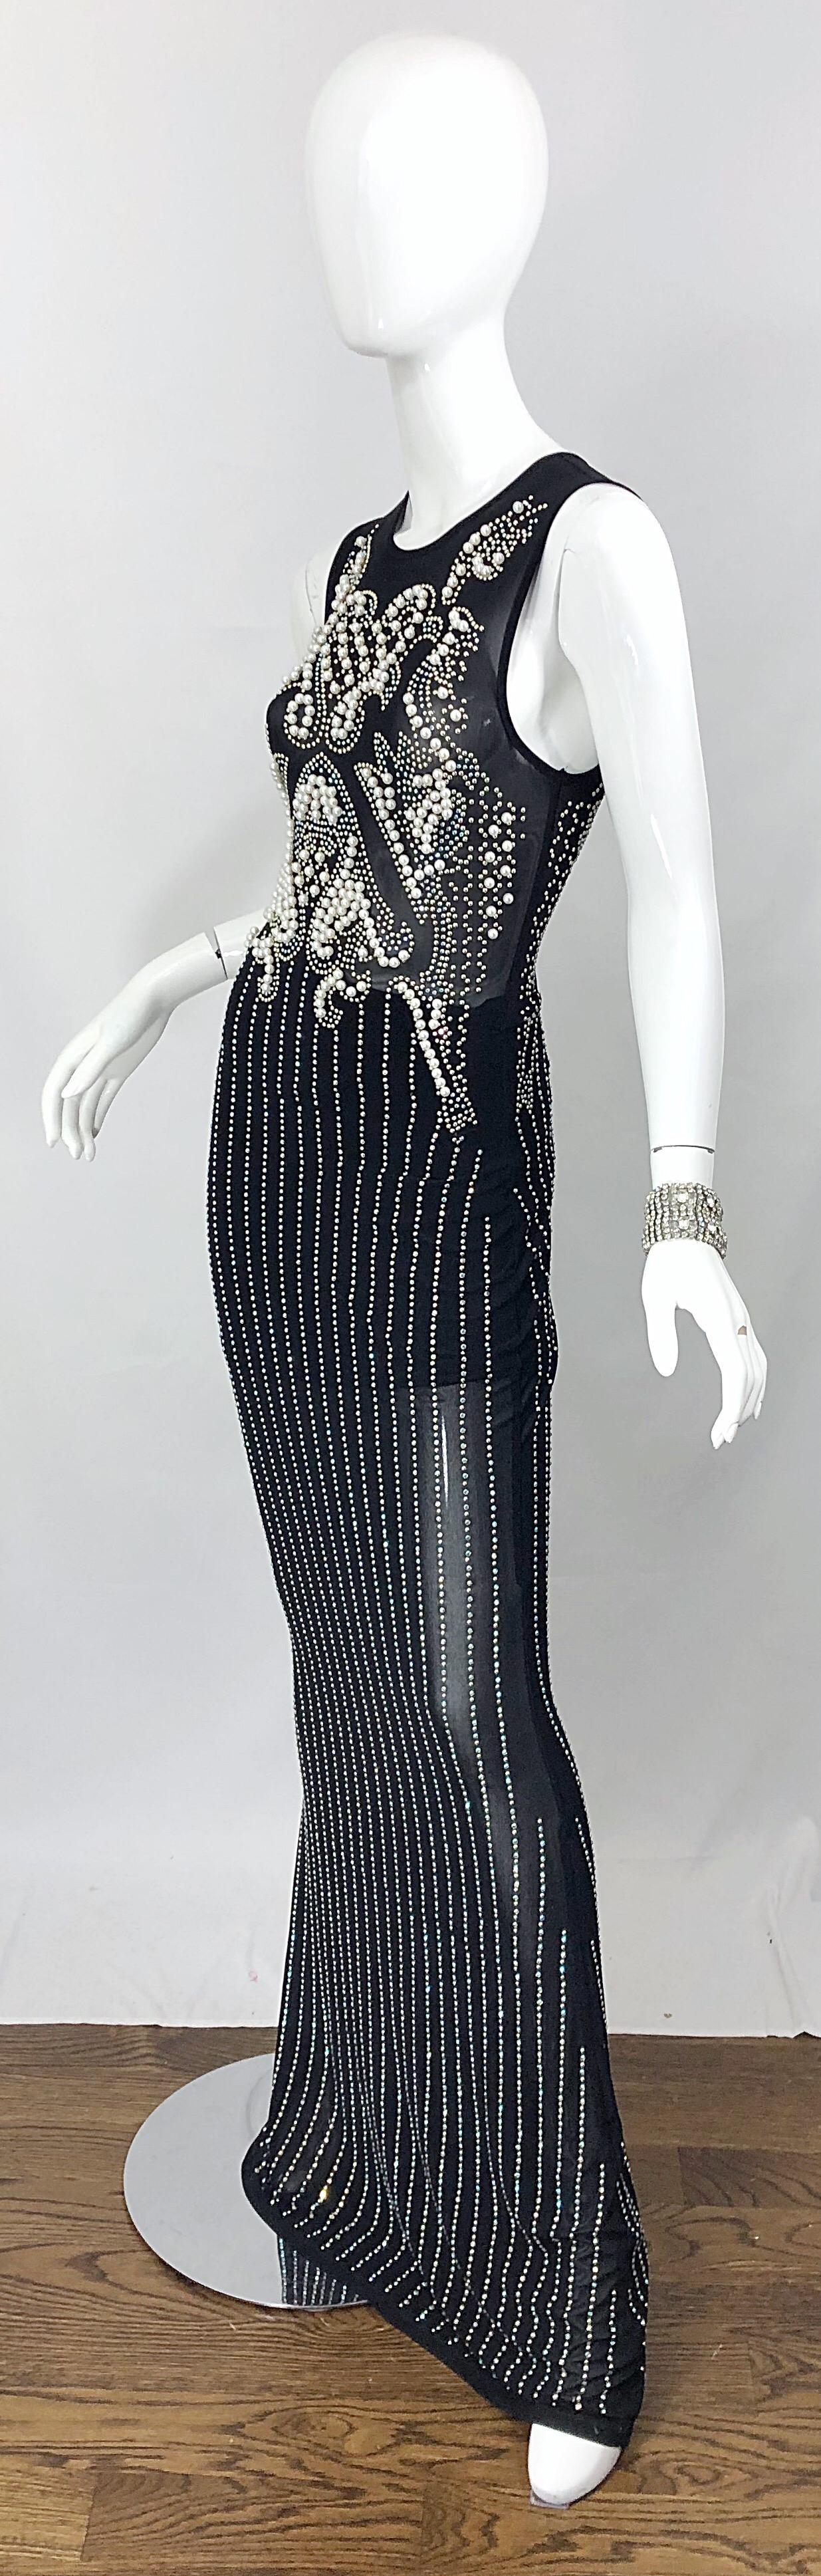 Incredible 1990s Black Pearl Rhinestone Studded Sheer Mesh Vintage Gown For Sale 6